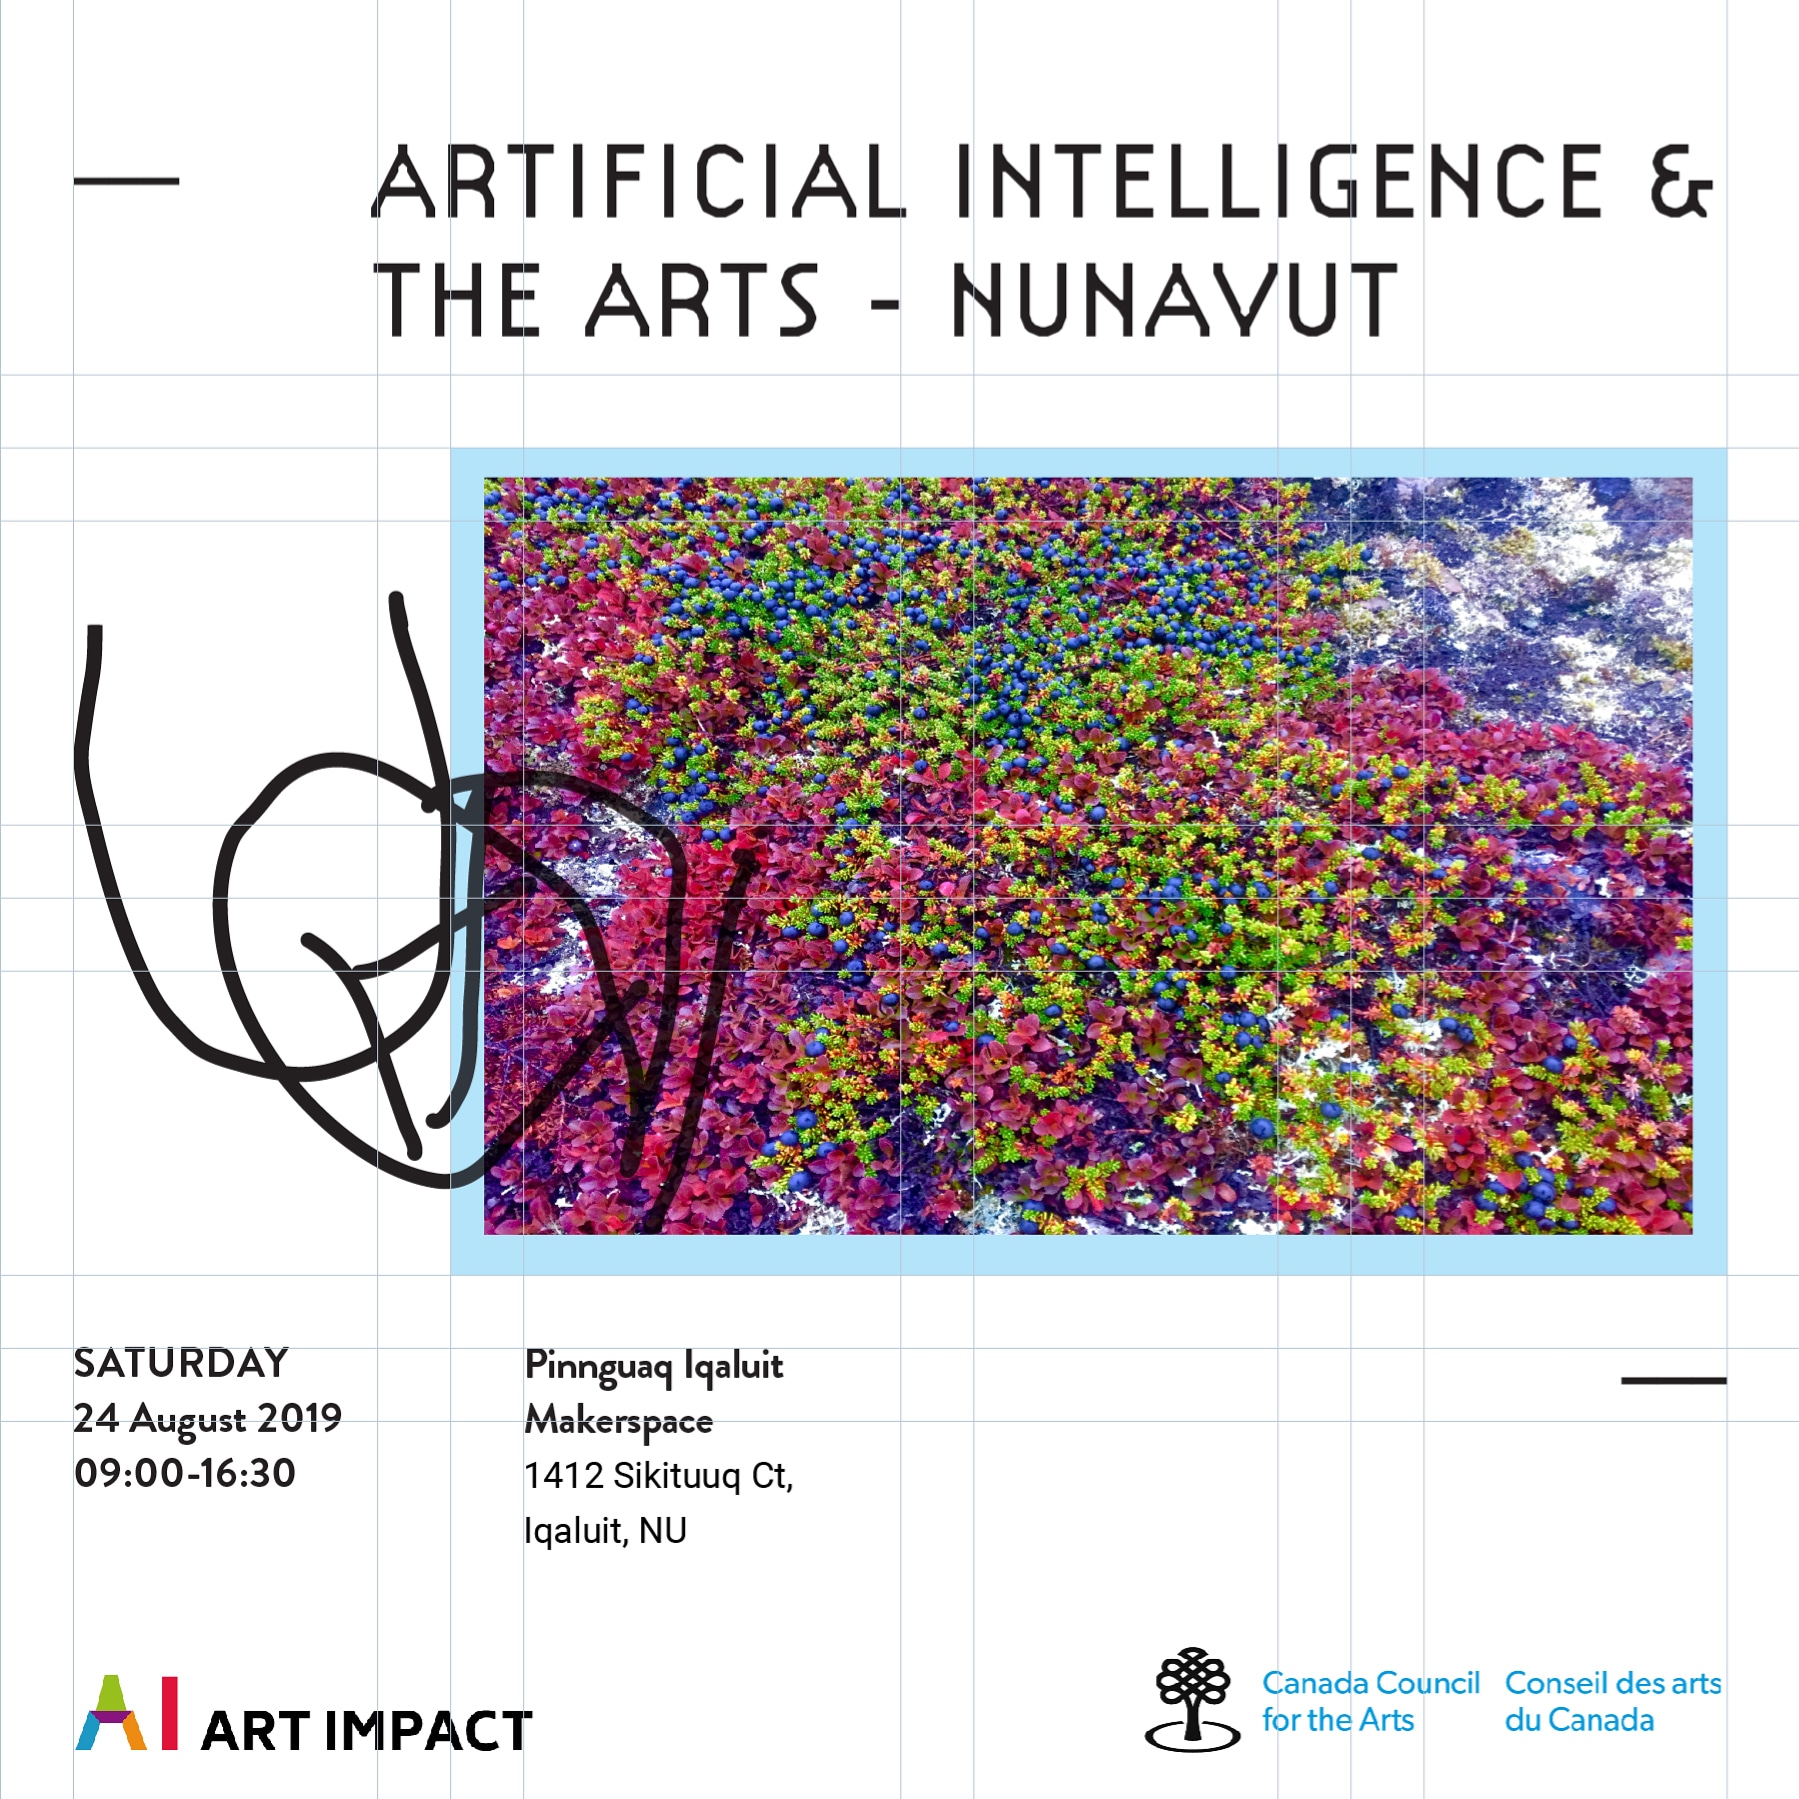 Promotional square for a workshop on artificial intelligence and culture hosted in Iqaluit, Nunavut. A picture of brightly colored lichen dominates the image.